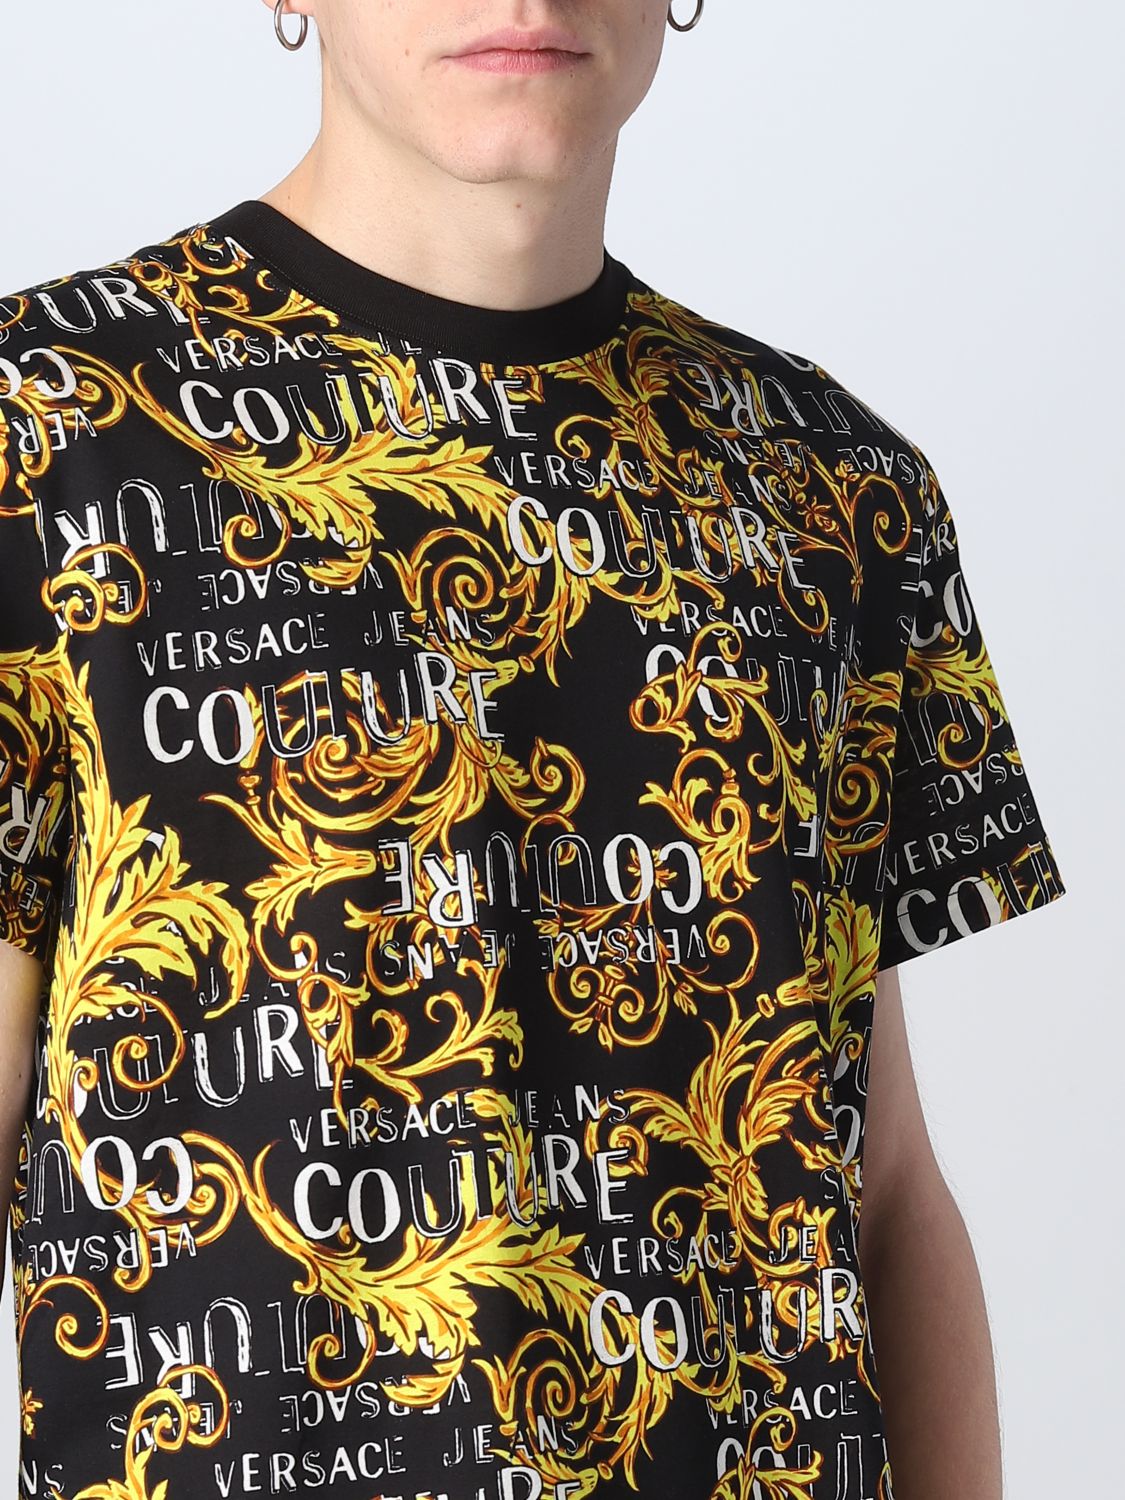 Versace Jeans Couture Baroque Logo Shirt 48 IT at FORZIERI